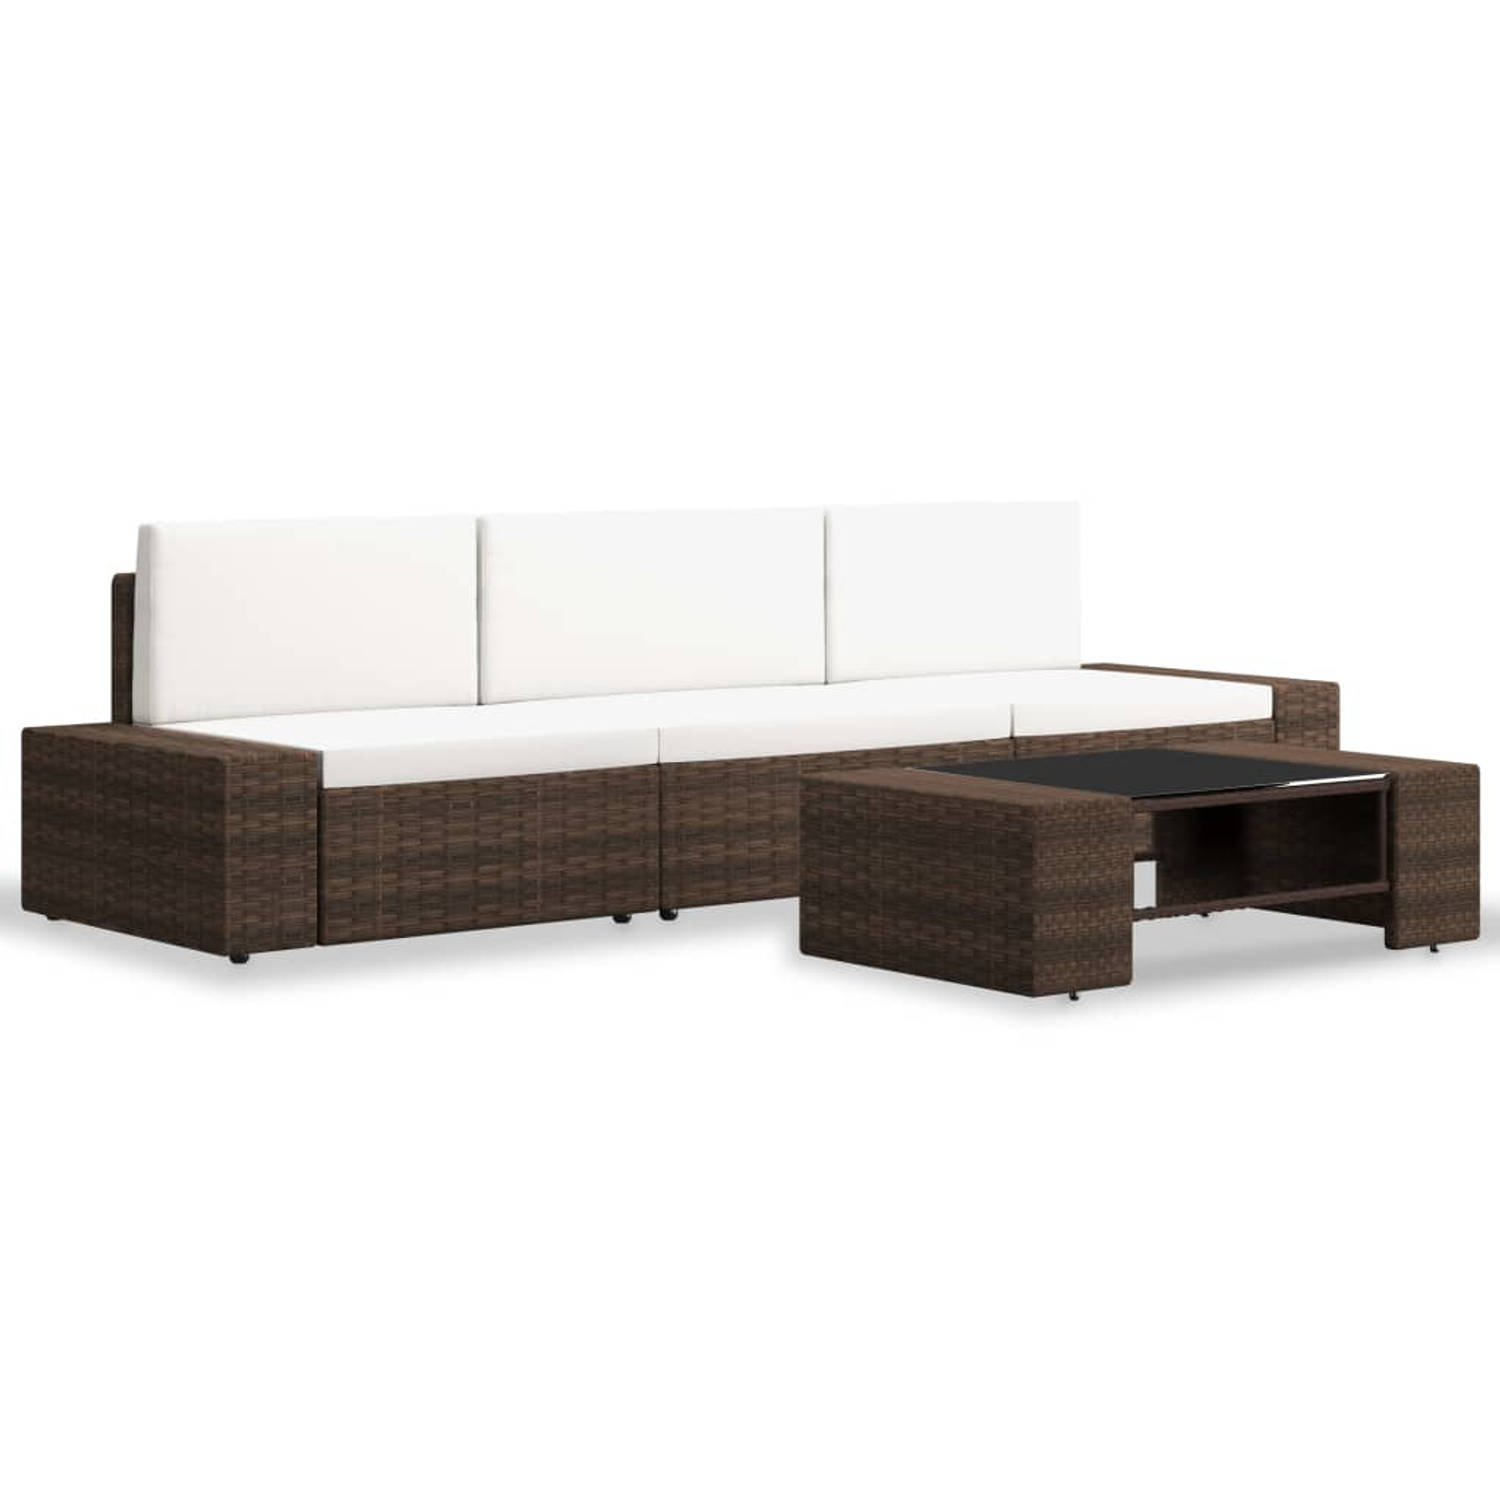 The Living Store Loungeset - Poly Rattan - Bruin/Crèmewit - Modulair Design